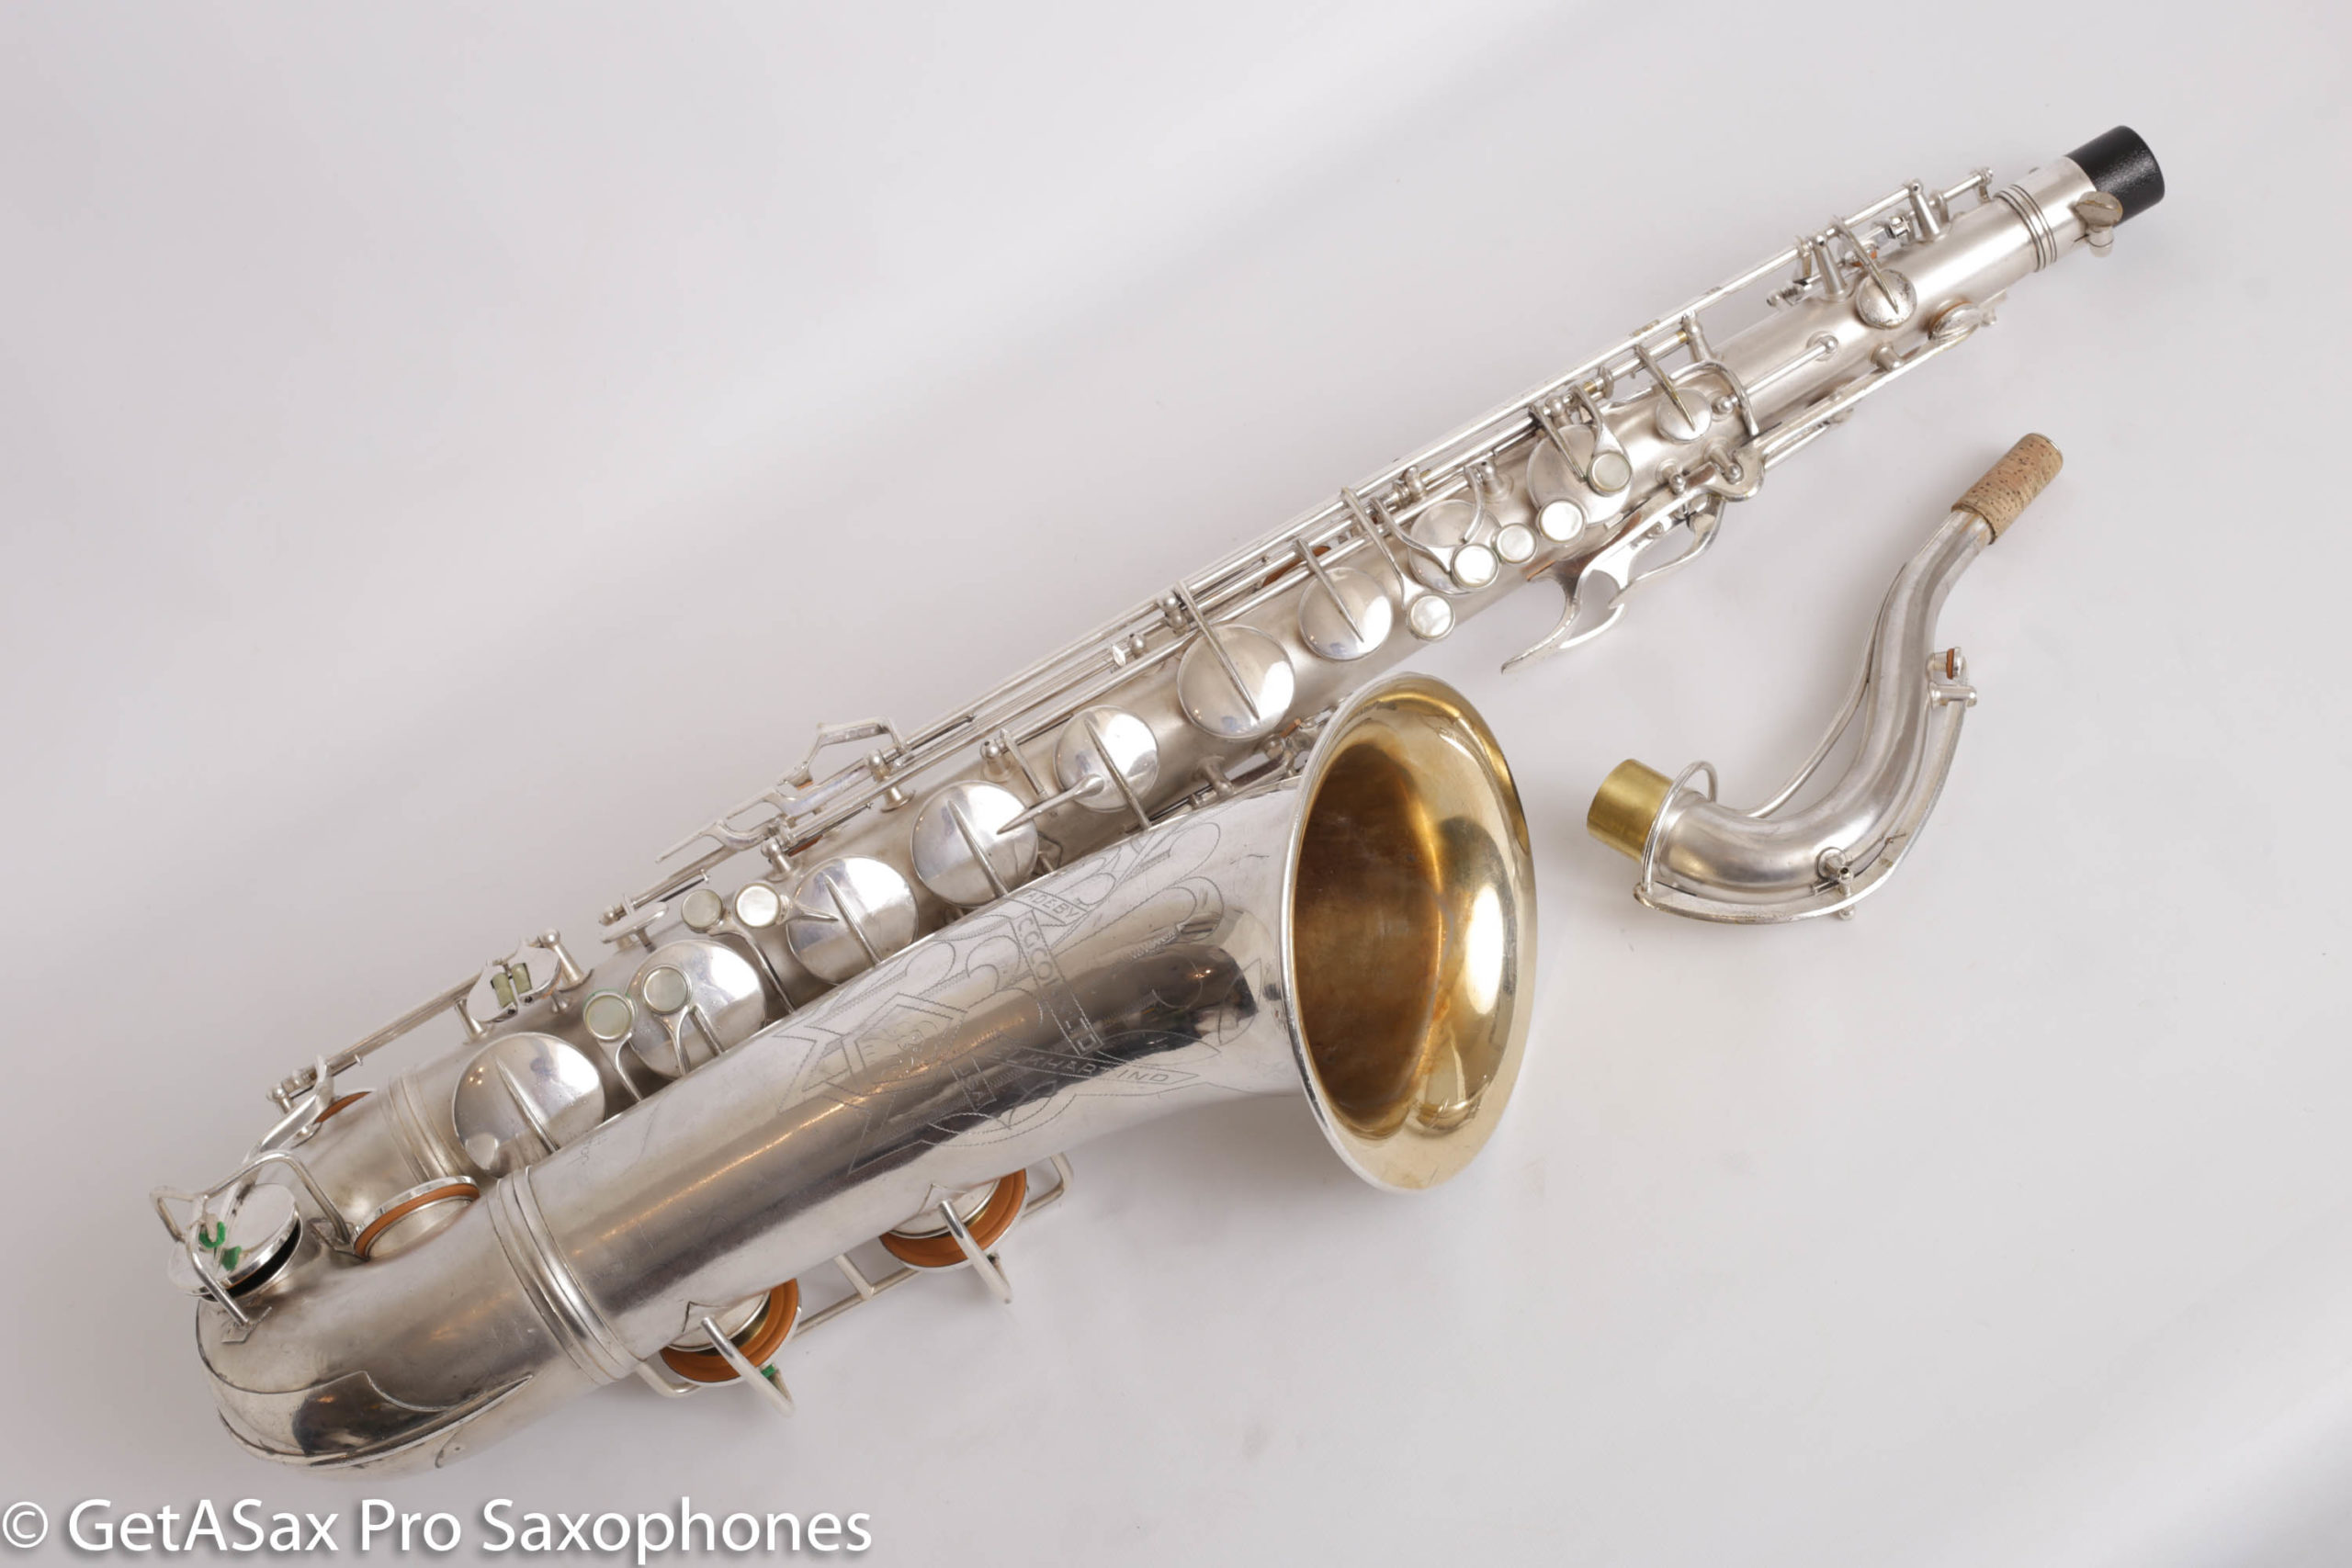 Fristelse konvergens acceptere Conn 10M Tenor Rolled Tone Holes Original Silver Plate Very Good Condition  Fresh Overhaul! 310735 - www.GetASax.com